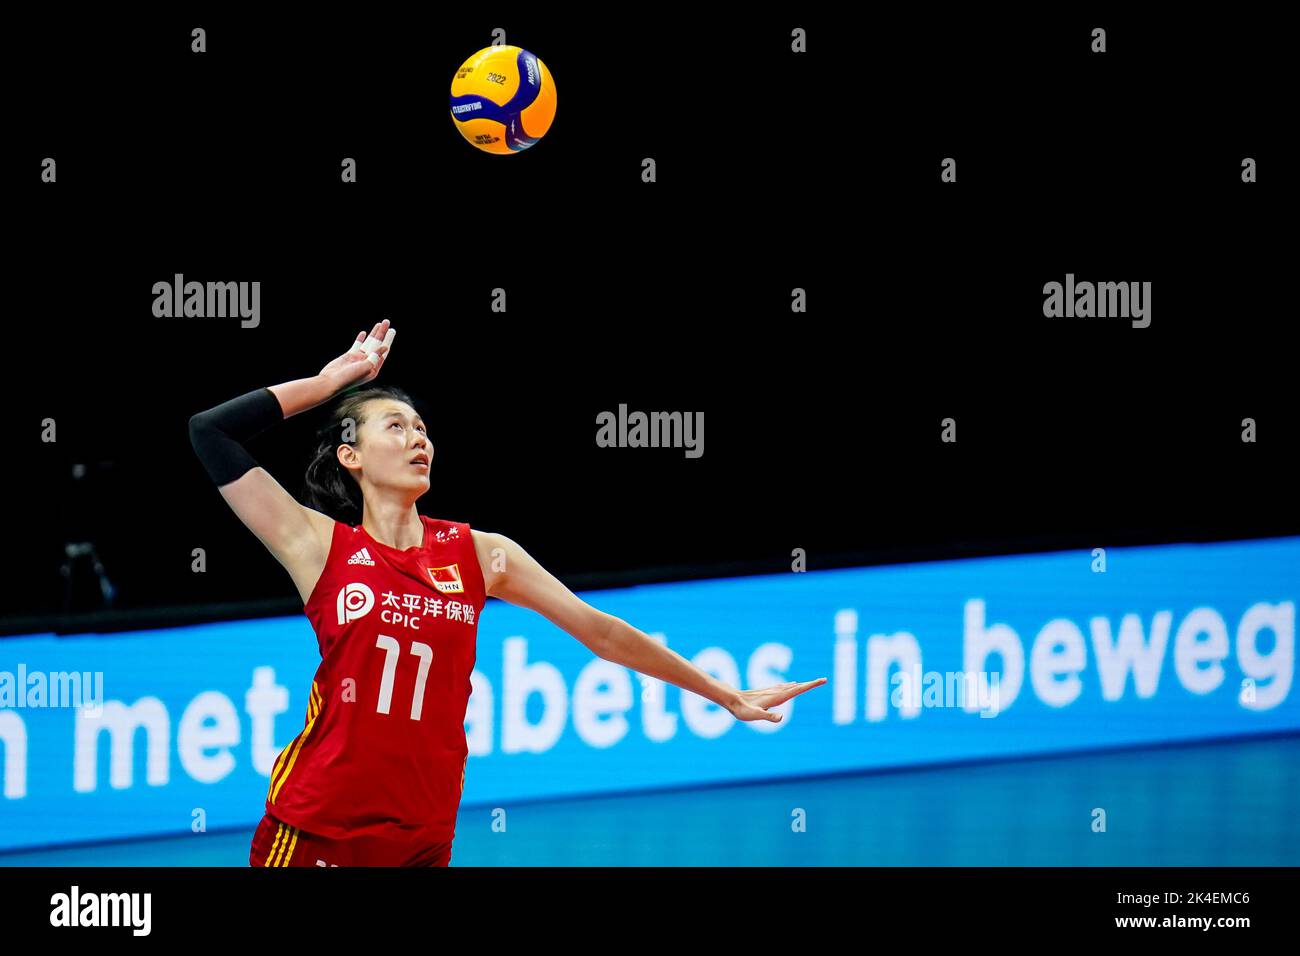 ARNHEM, NETHERLANDS - SEPTEMBER 25: Yizhu Wang of China serves during the Pool D Phase 1 match between China and Argentina on Day 3 of the FIVB Volleyball Womens World Championship 2022 at the Gelredome on September 25, 2022 in Arnhem, Netherlands (Photo by Rene Nijhuis/Orange Pictures) Stock Photo